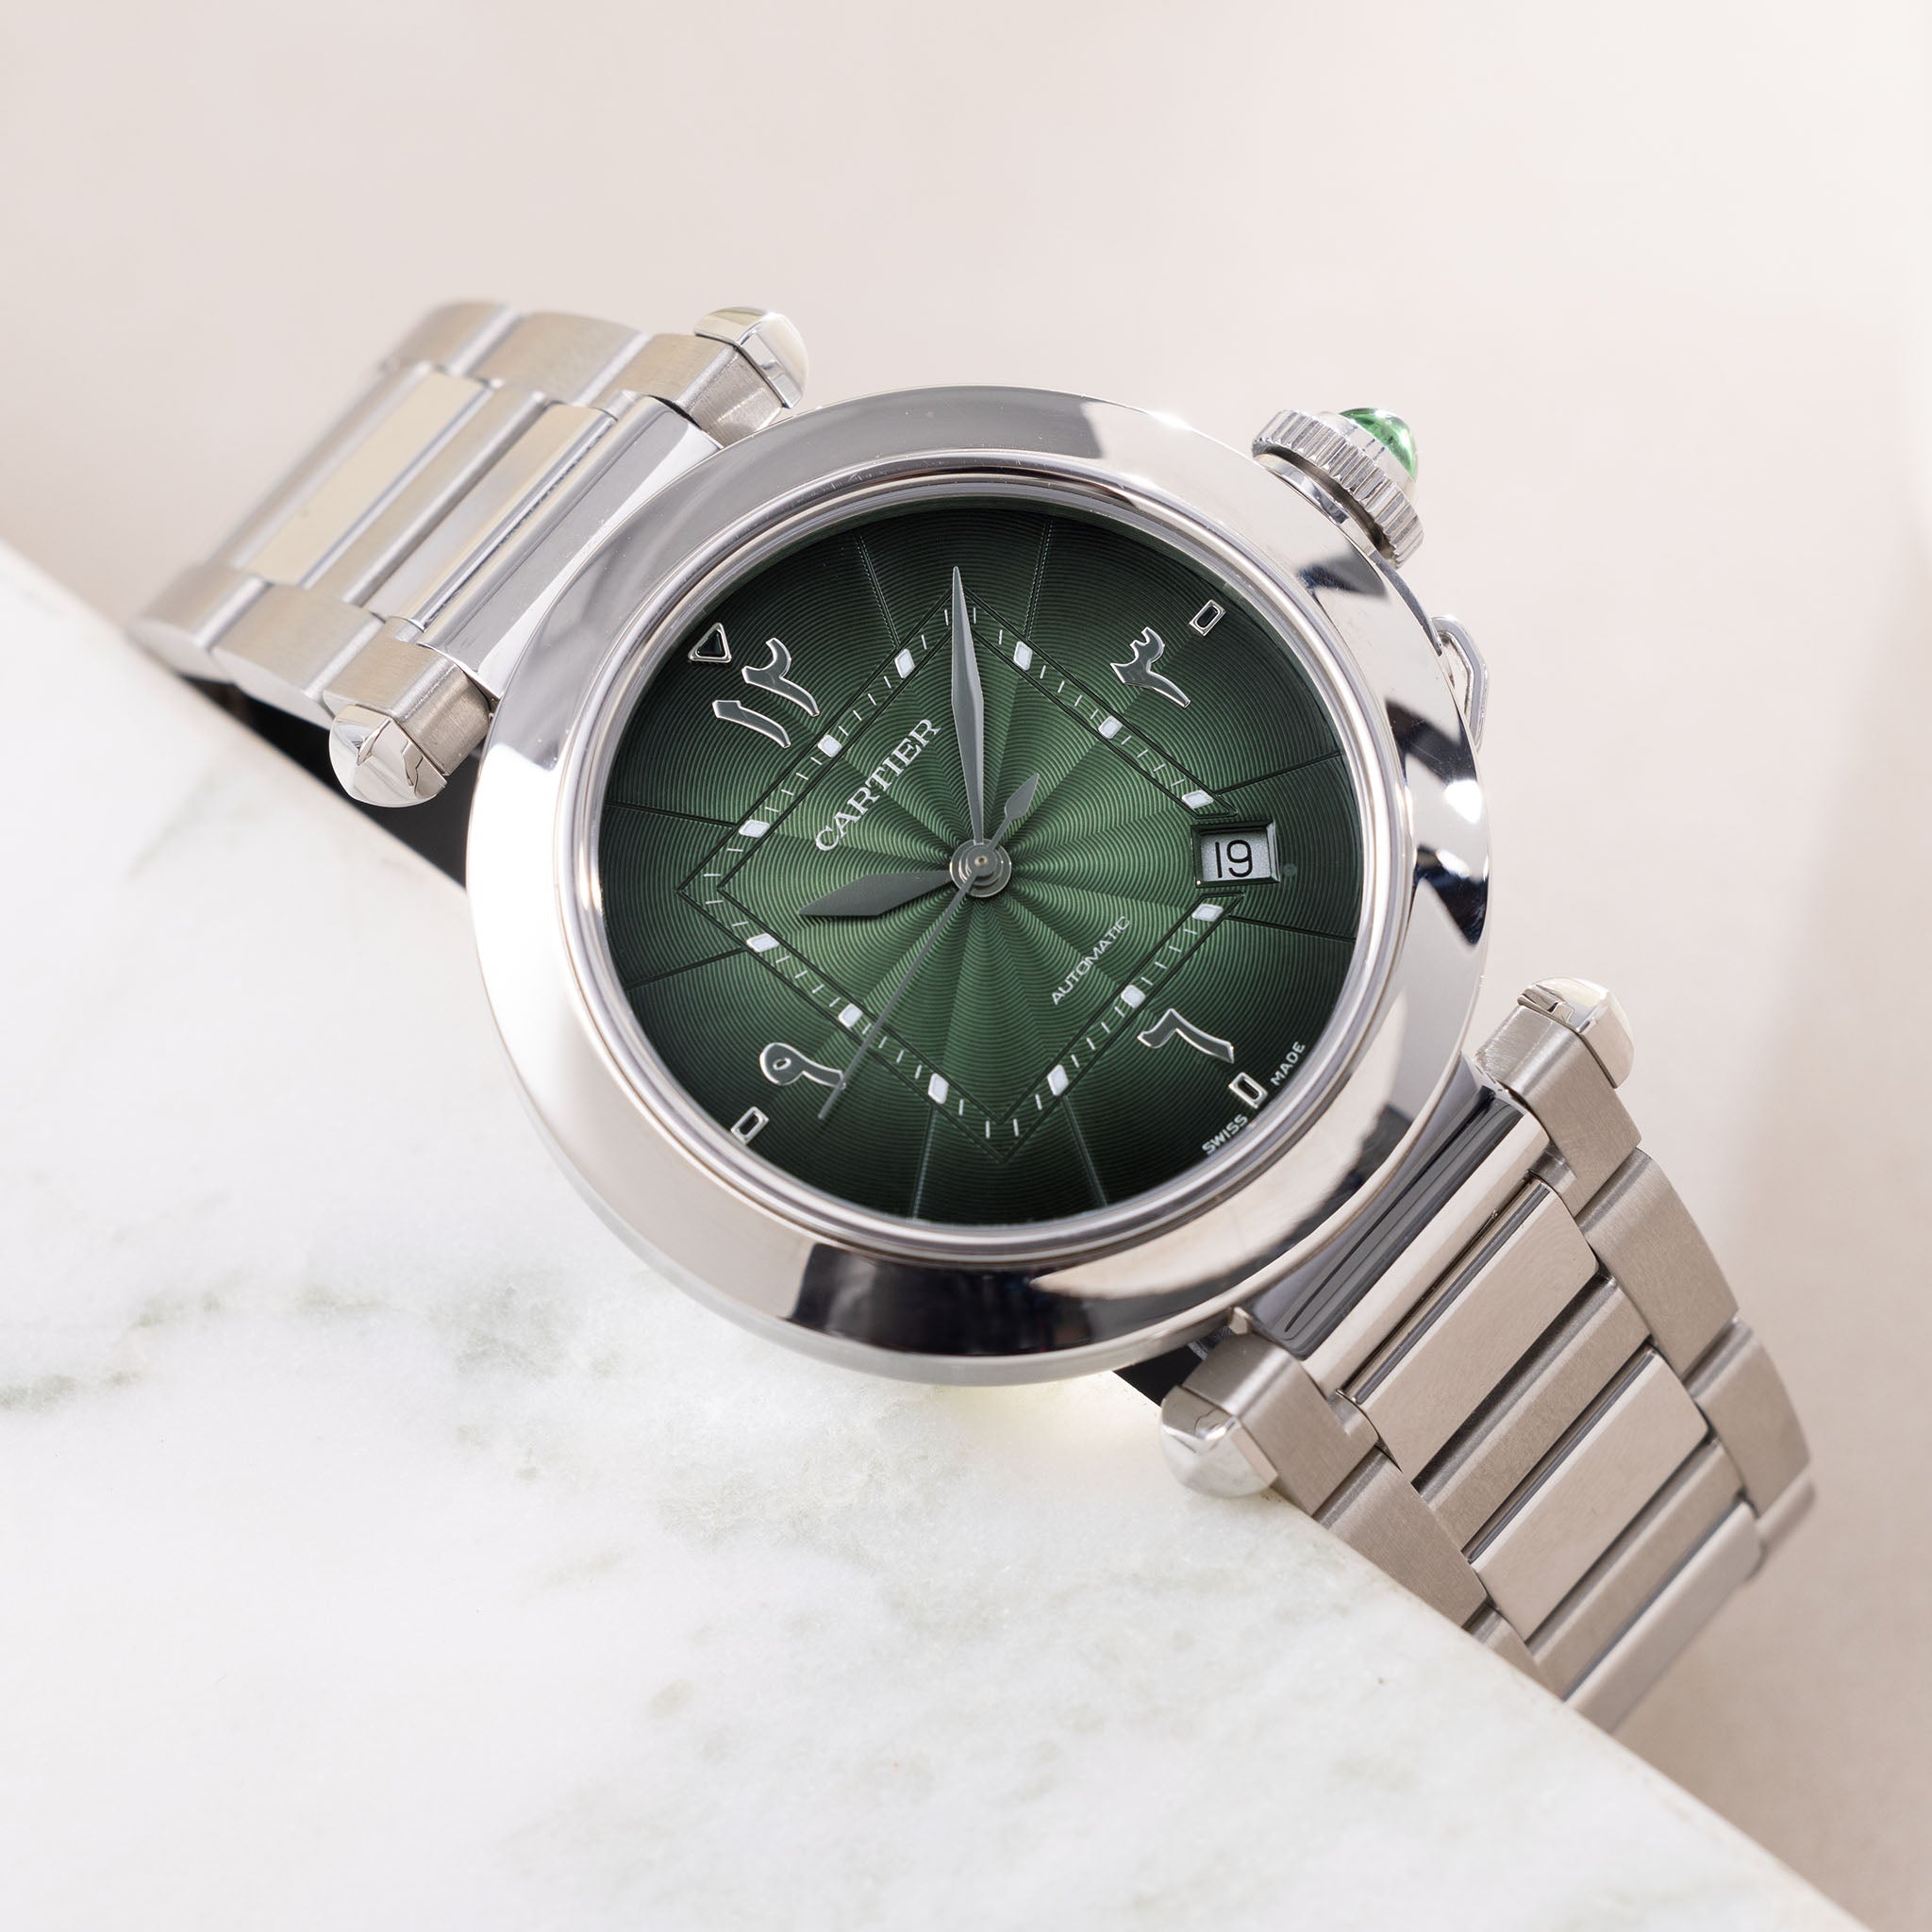 Cartier Pasha Green Middle East limited Edition with Warrantee Card 